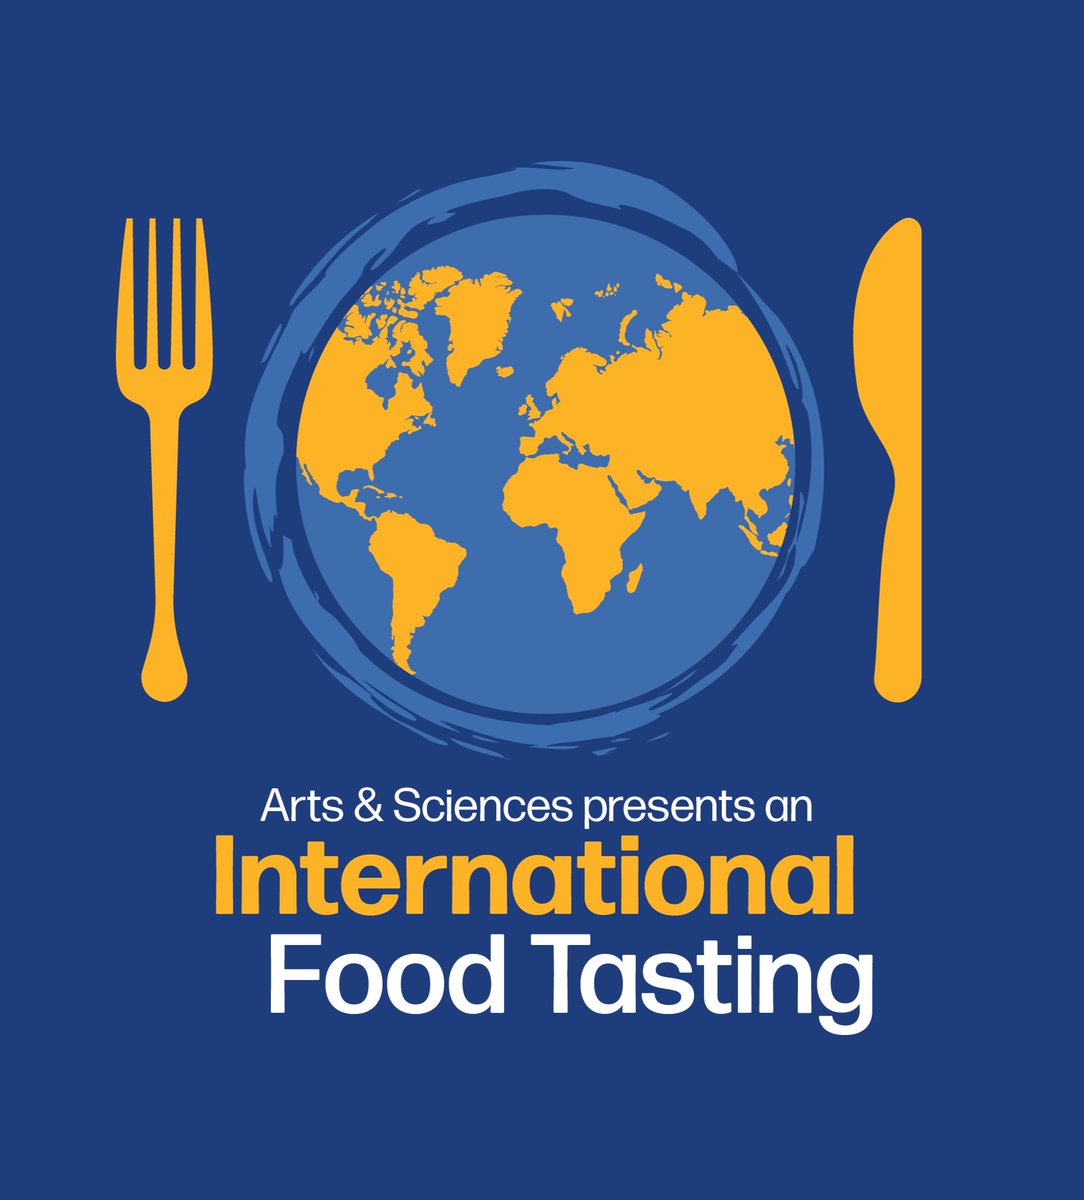 Happening Now! On March 14, join our Arts & Sciences faculty and students for this year's International Food Tasting until 1 p.m. in the Blue Ridge Conference Hall. It's a celebration of food at home and abroad for only $5 per plate. #EducationElevated